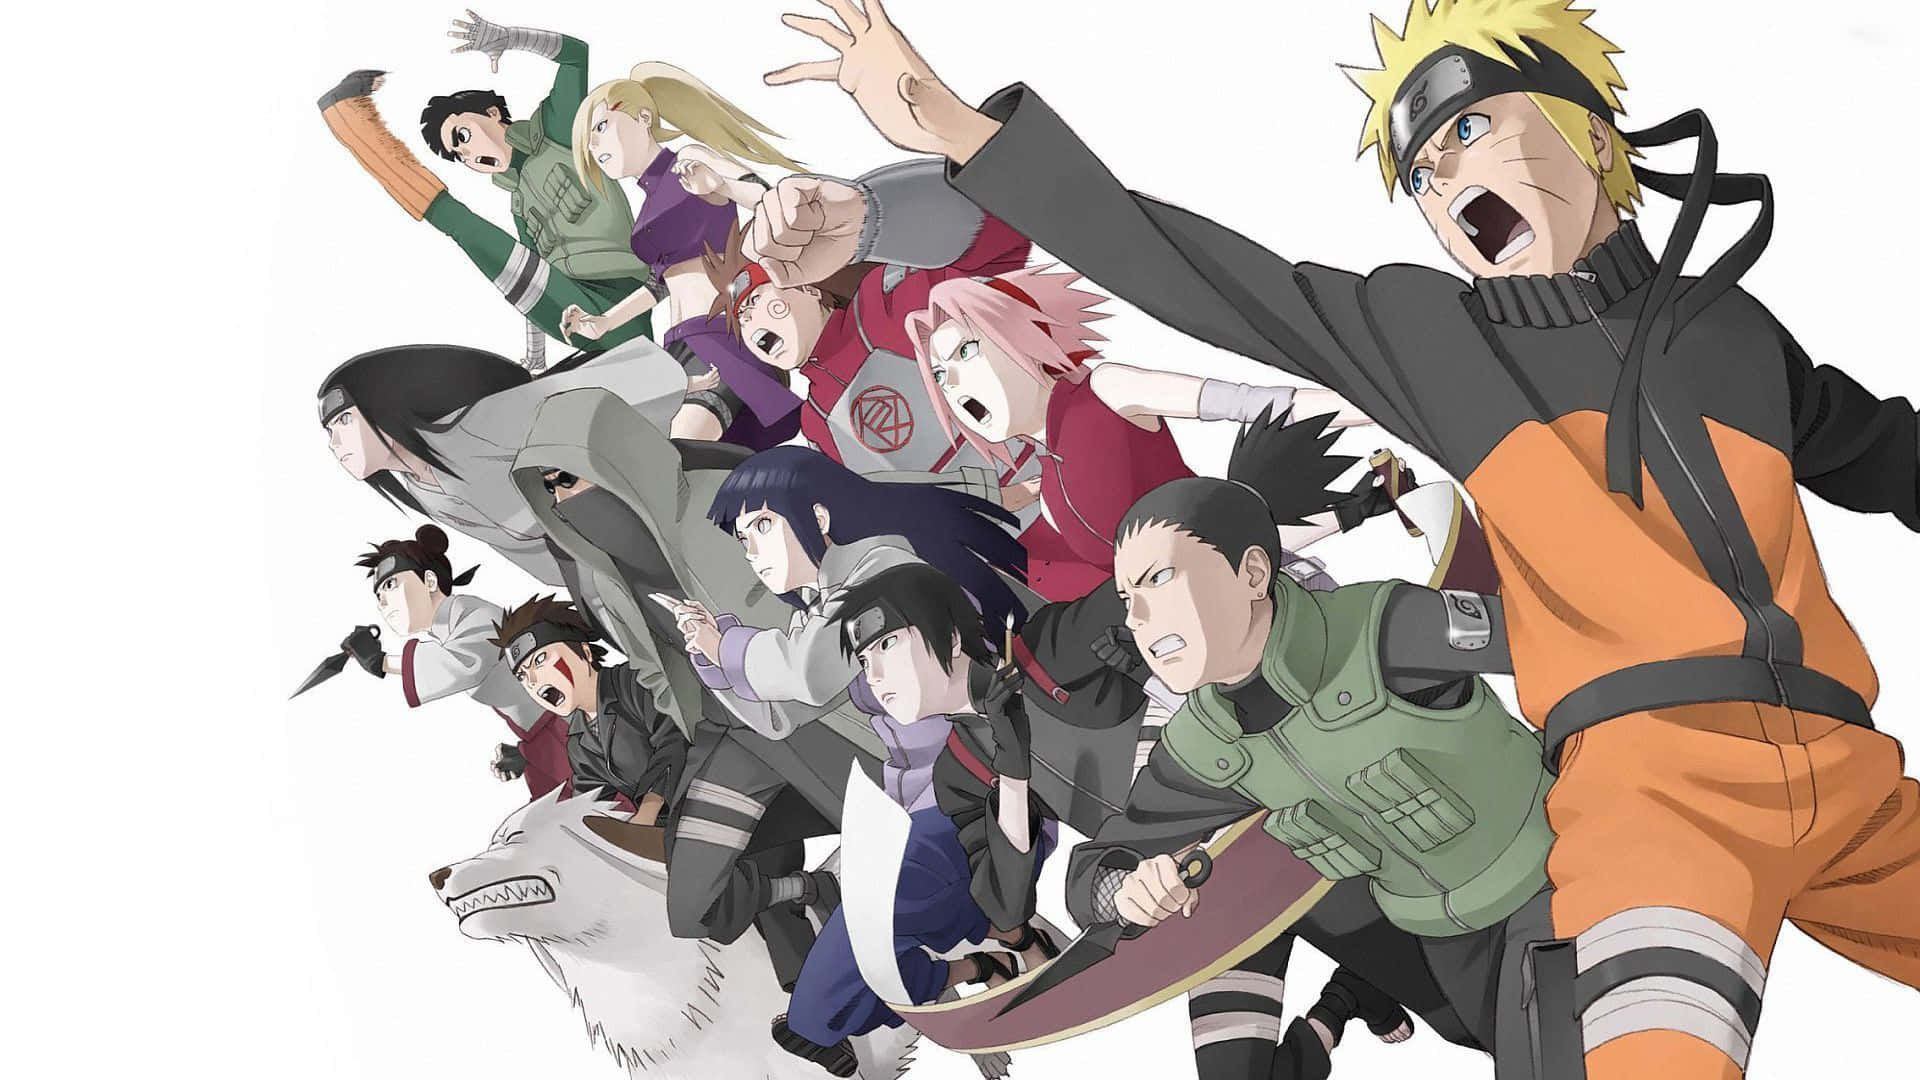 Naruto and his friends pose together during their adventures Wallpaper